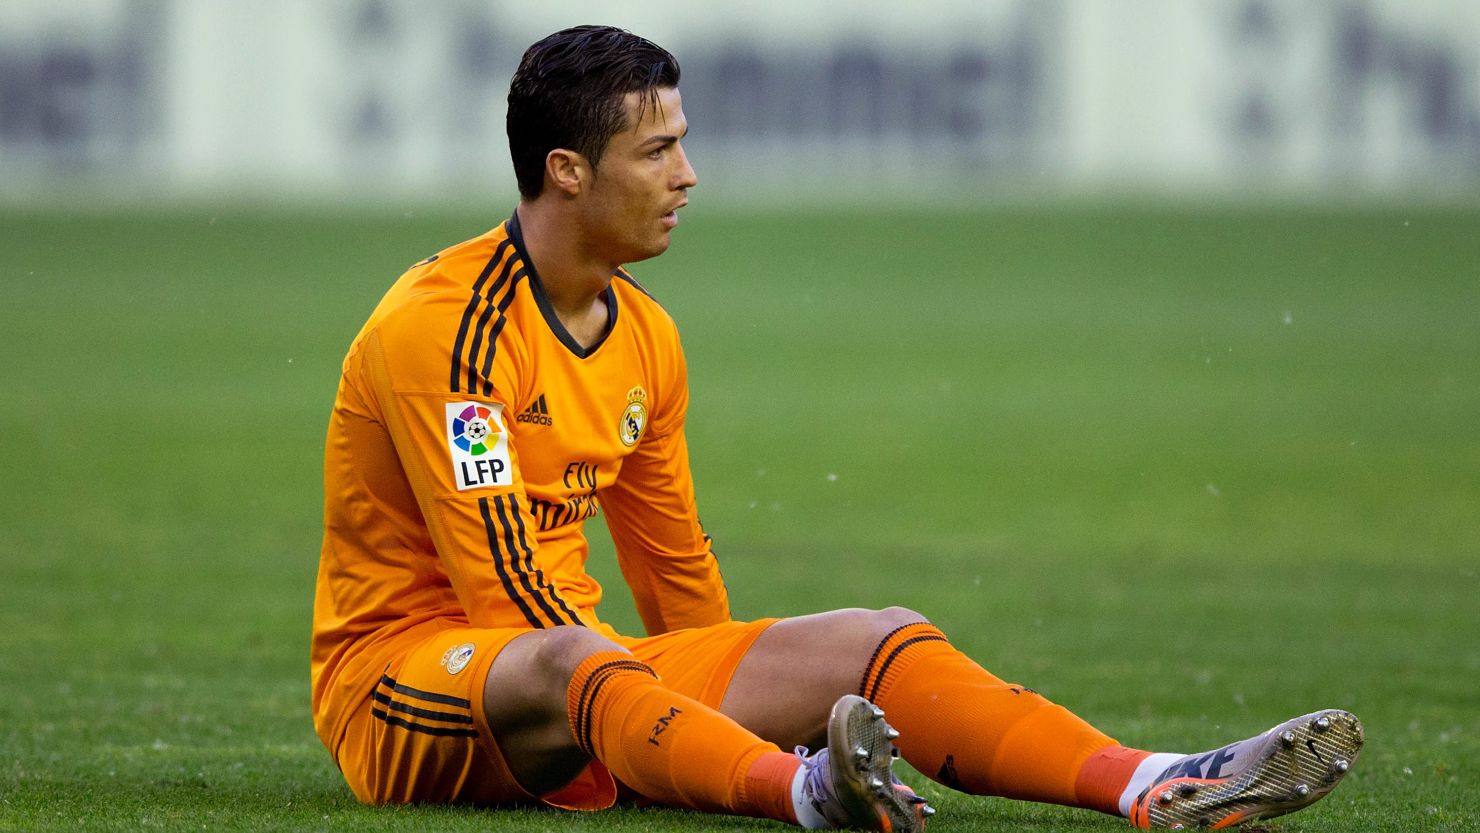 Cristiano Ronaldo lasted just nine minutes of Real Madrid's game at Valladolid after suffering an injury. 